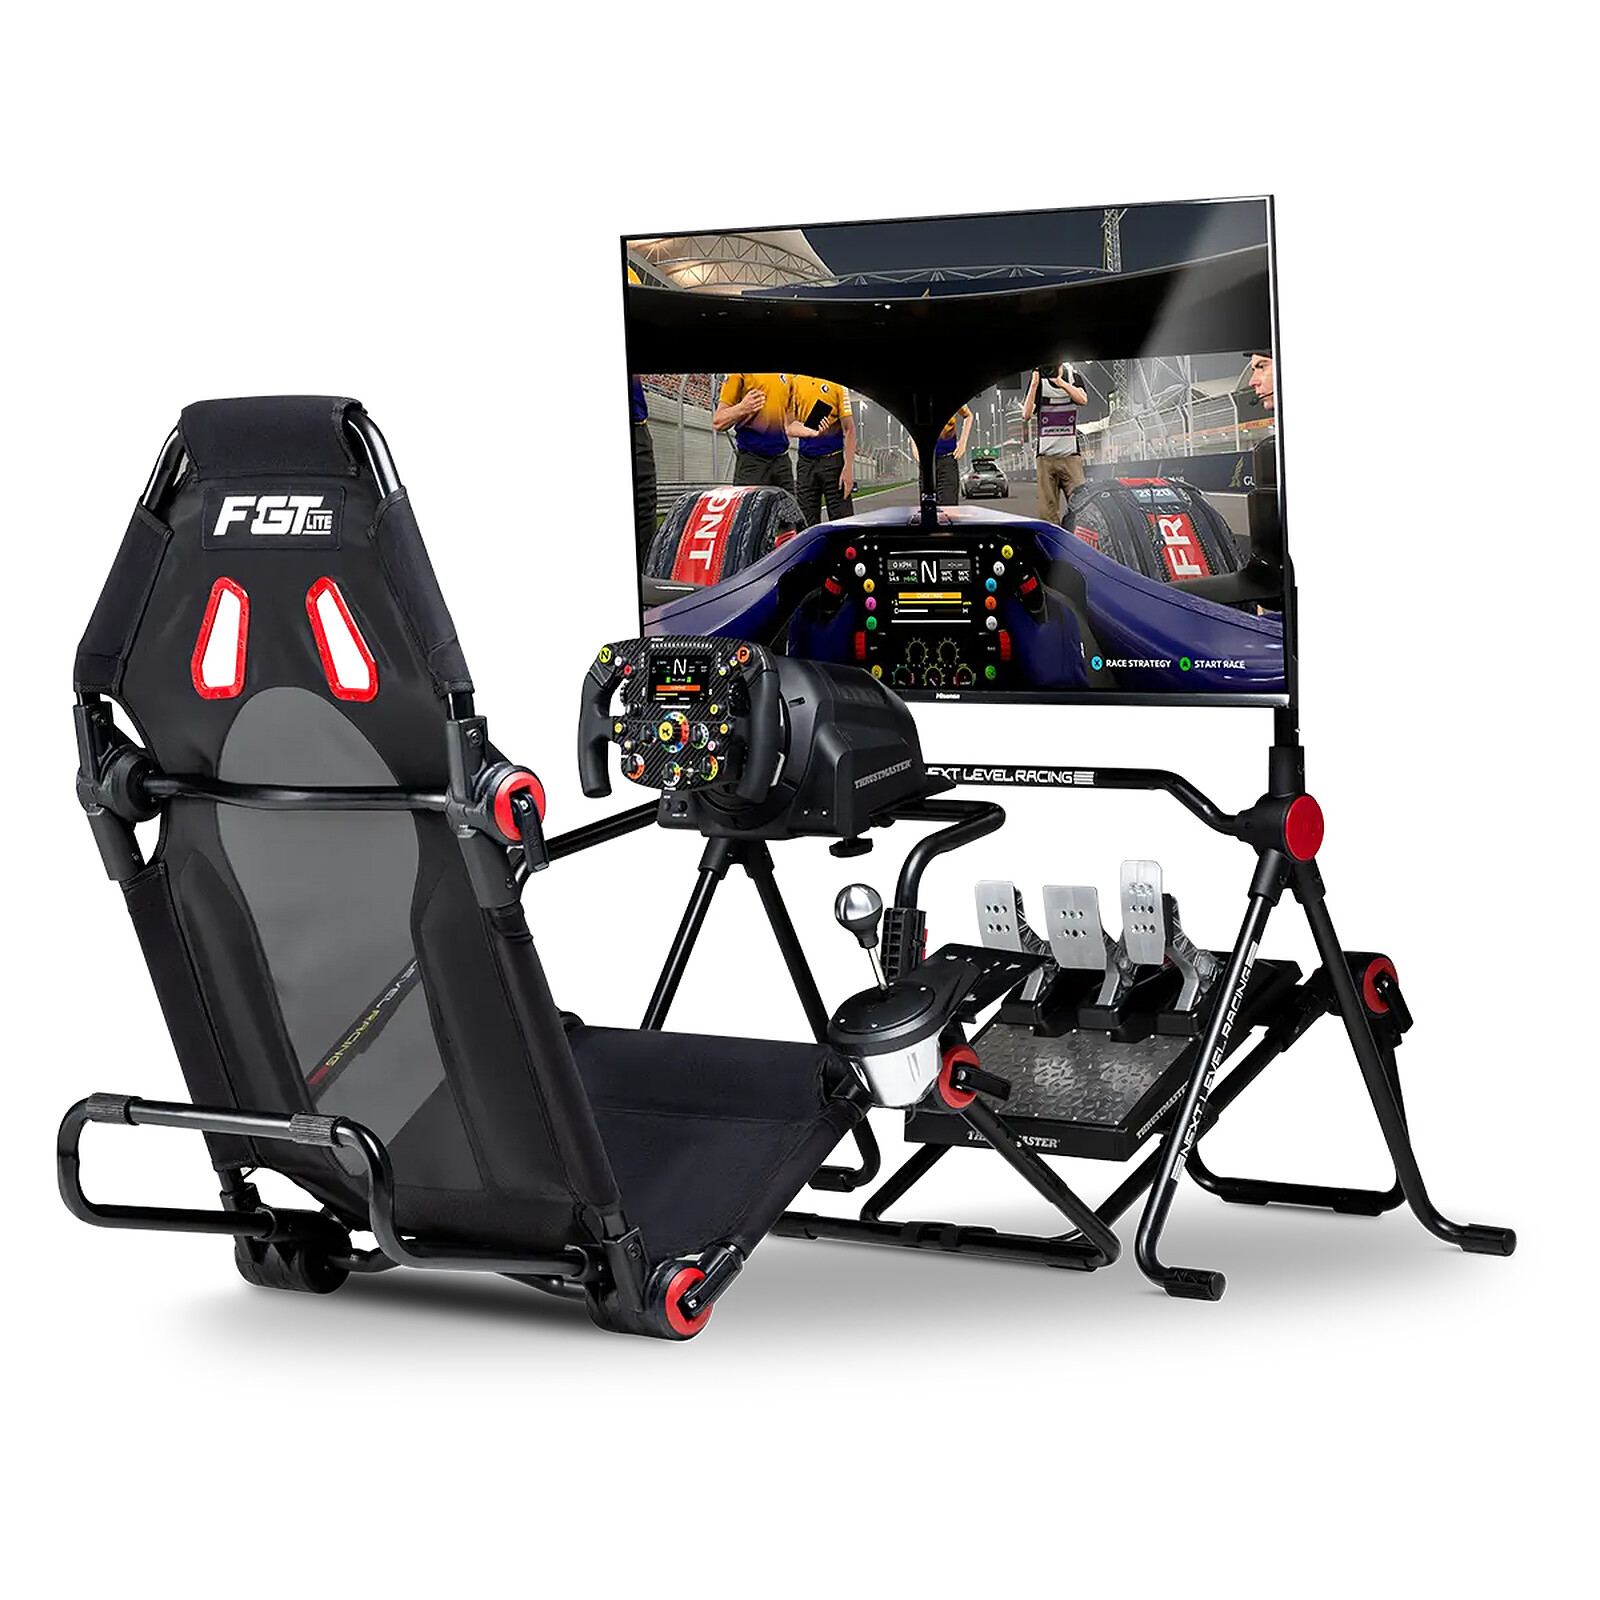 Next Level Racing Free Standing Monitor Stand - Other gaming accessories -  LDLC 3-year warranty